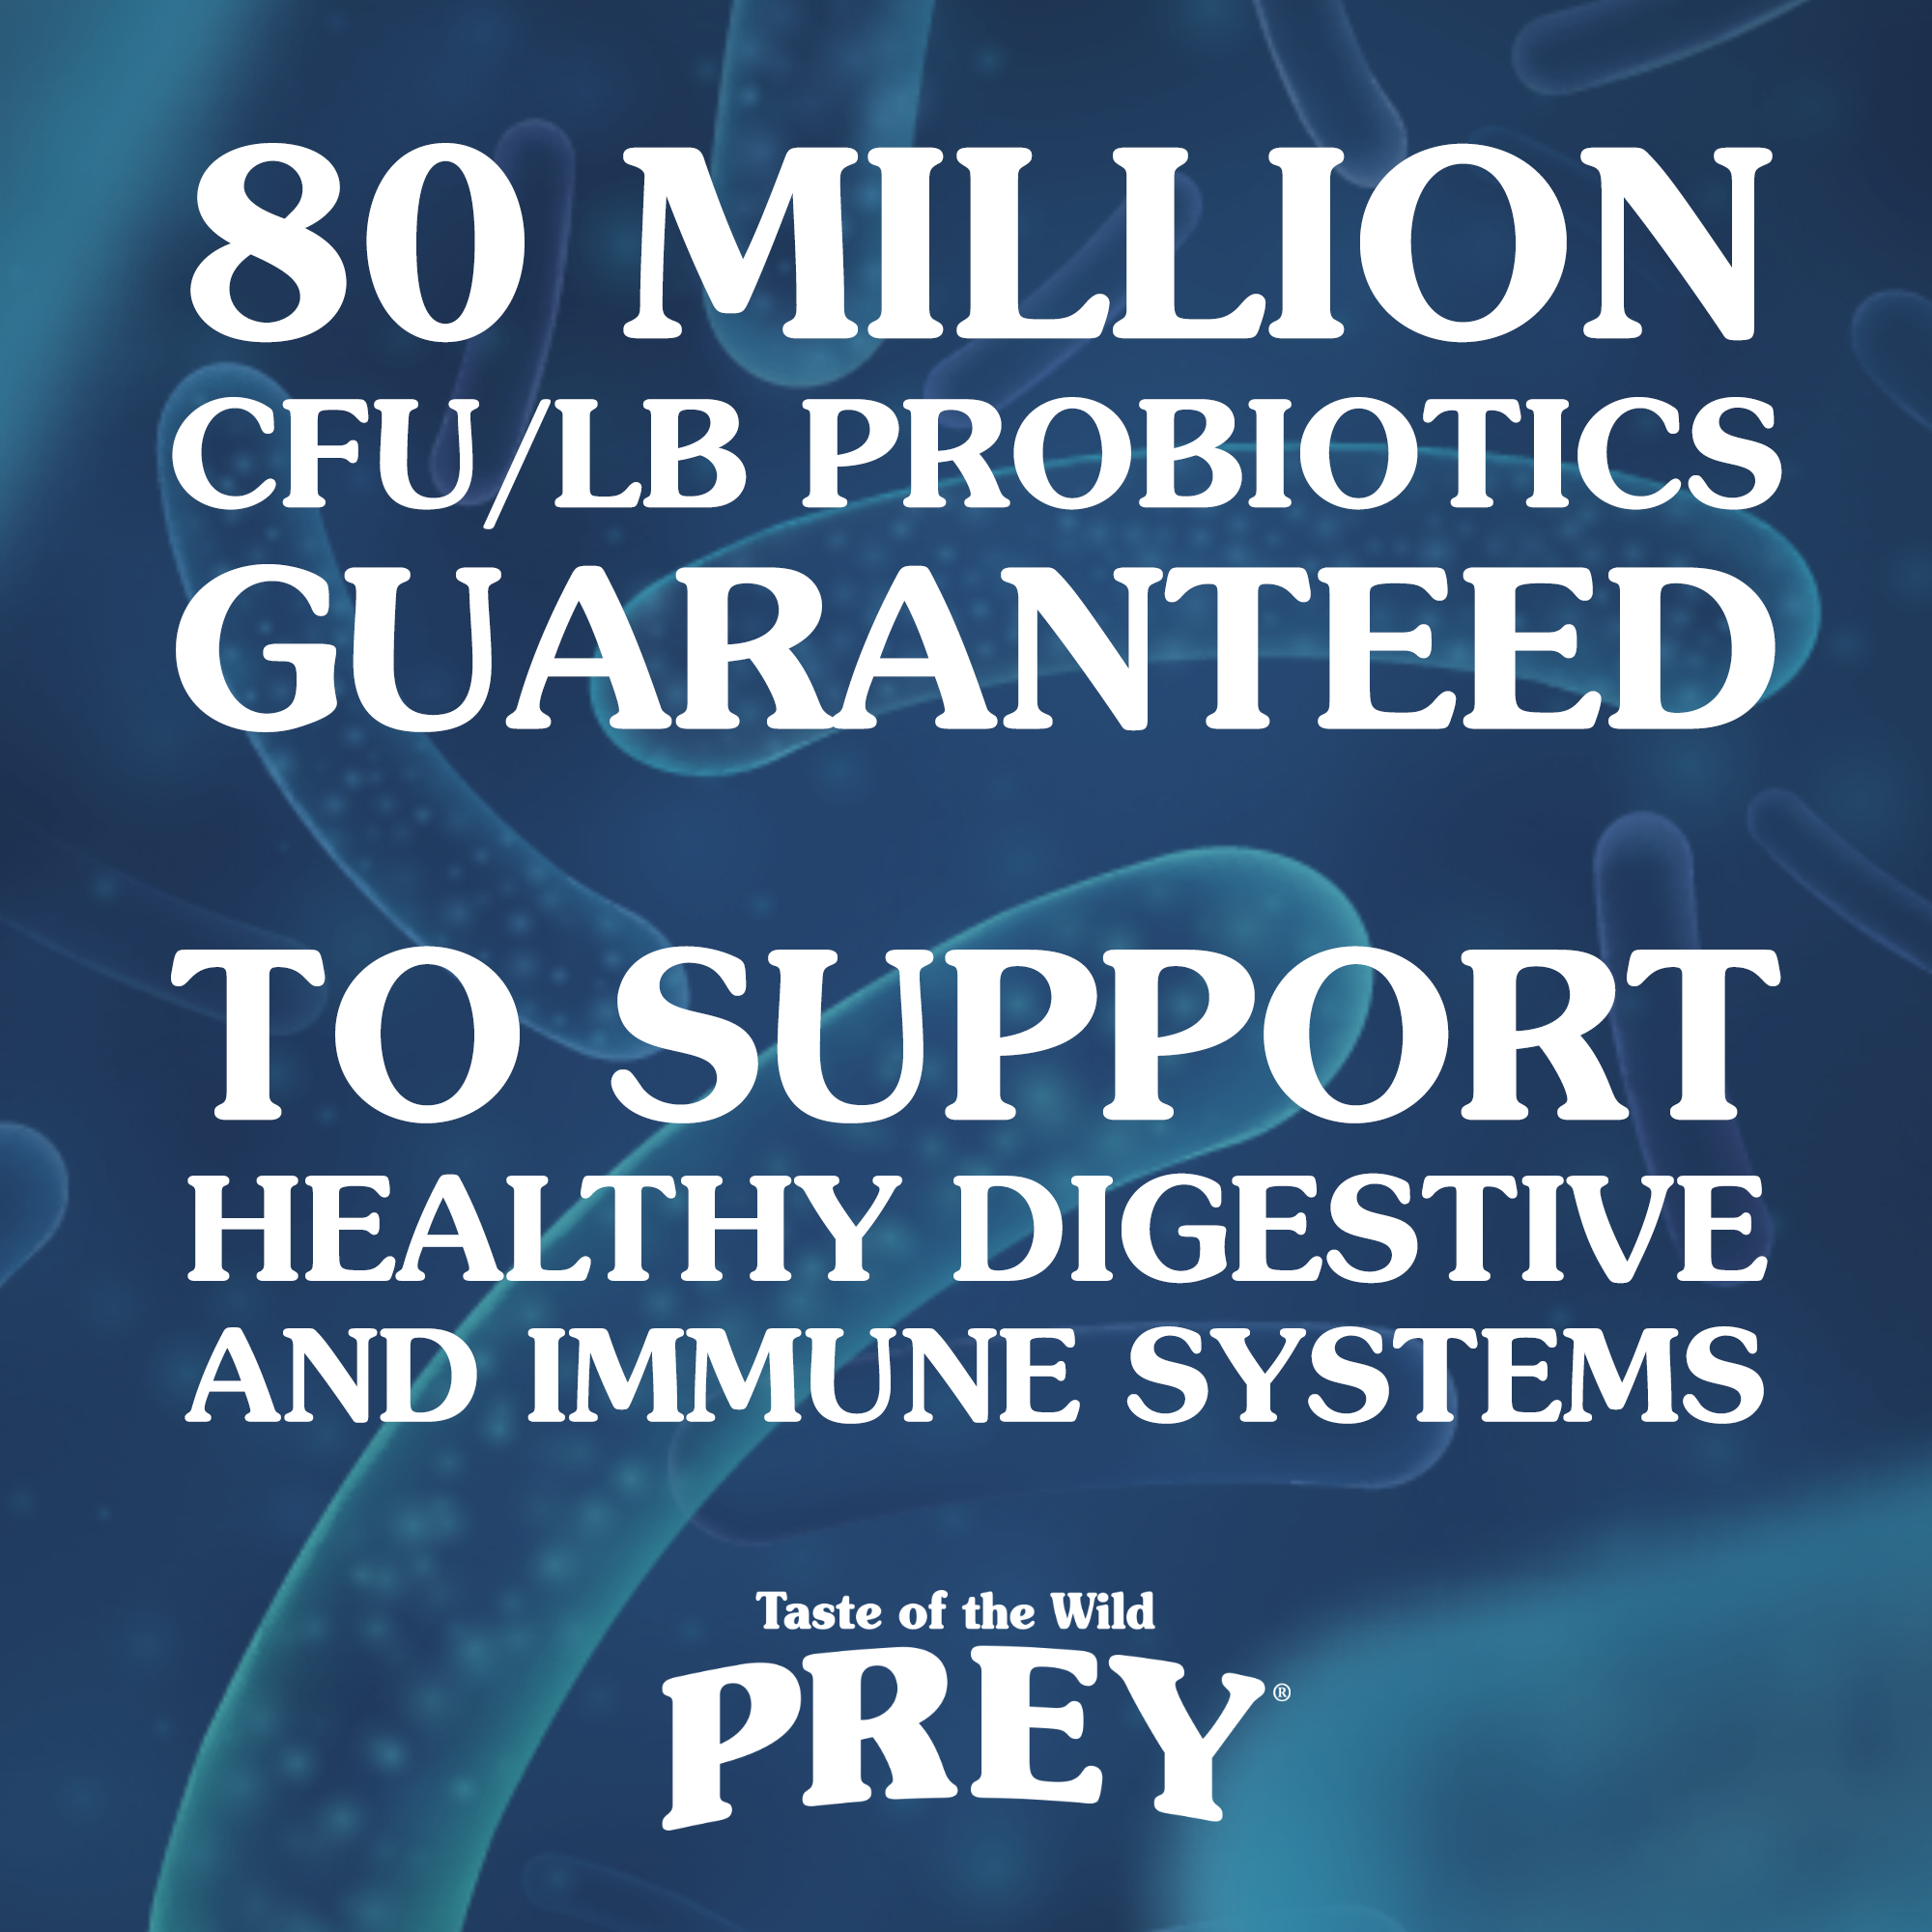 A blue graphic with text that reads '80 Million CFU/LB Probiotics Guaranteed To Support Healthy Digestive and Immune Systems'.